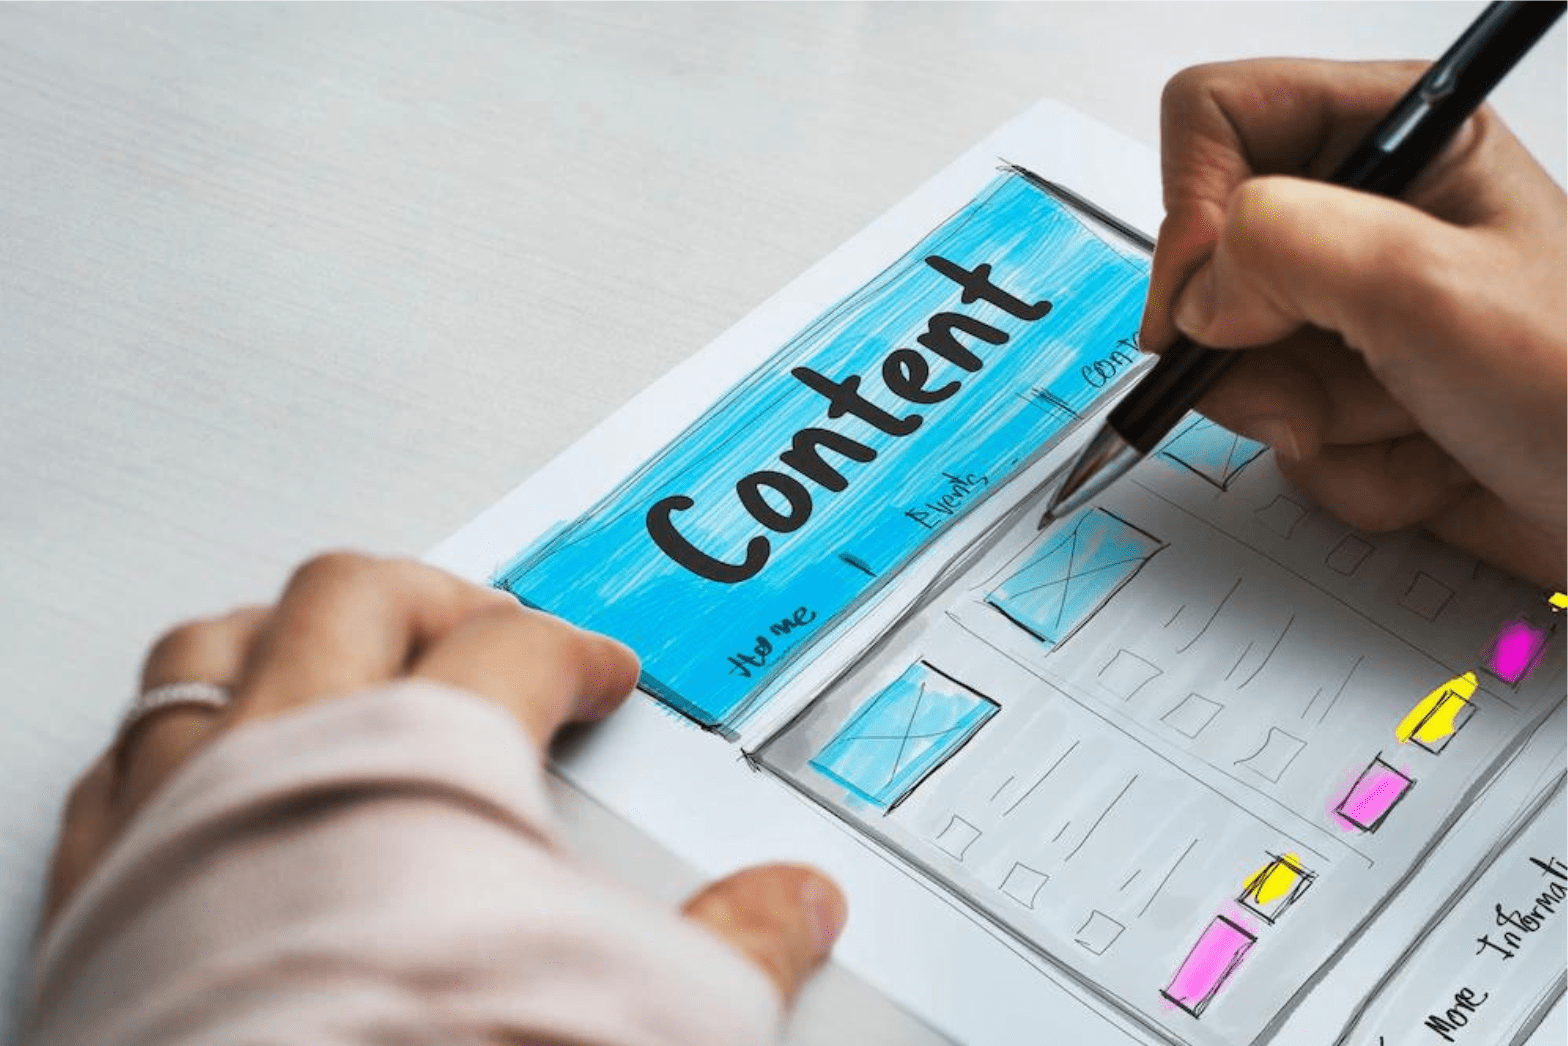 The Complete Guide for Content Creation in 2022